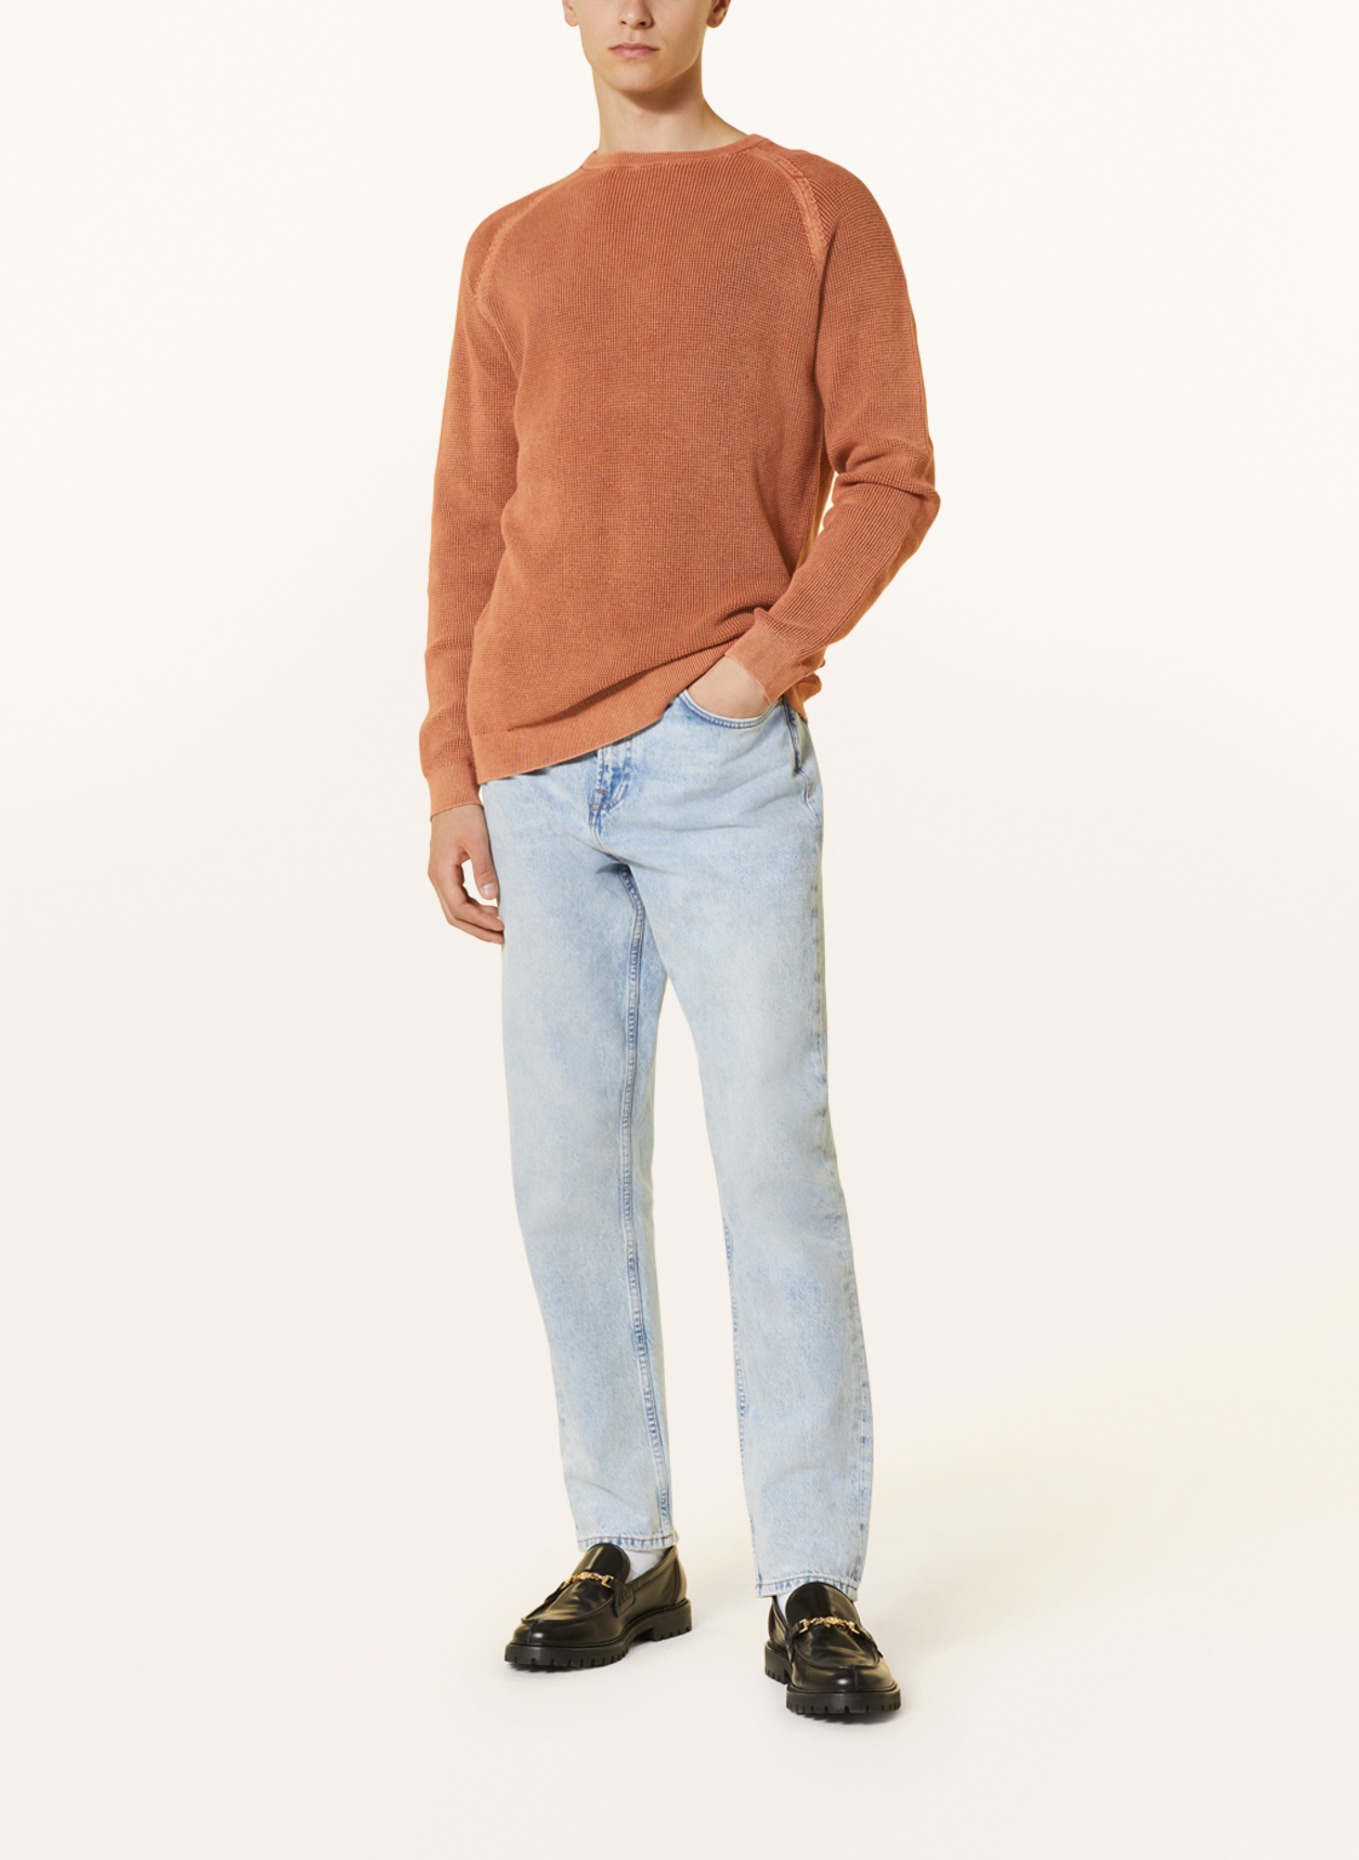 COLOURS & SONS Sweater, Color: SALMON (Image 2)